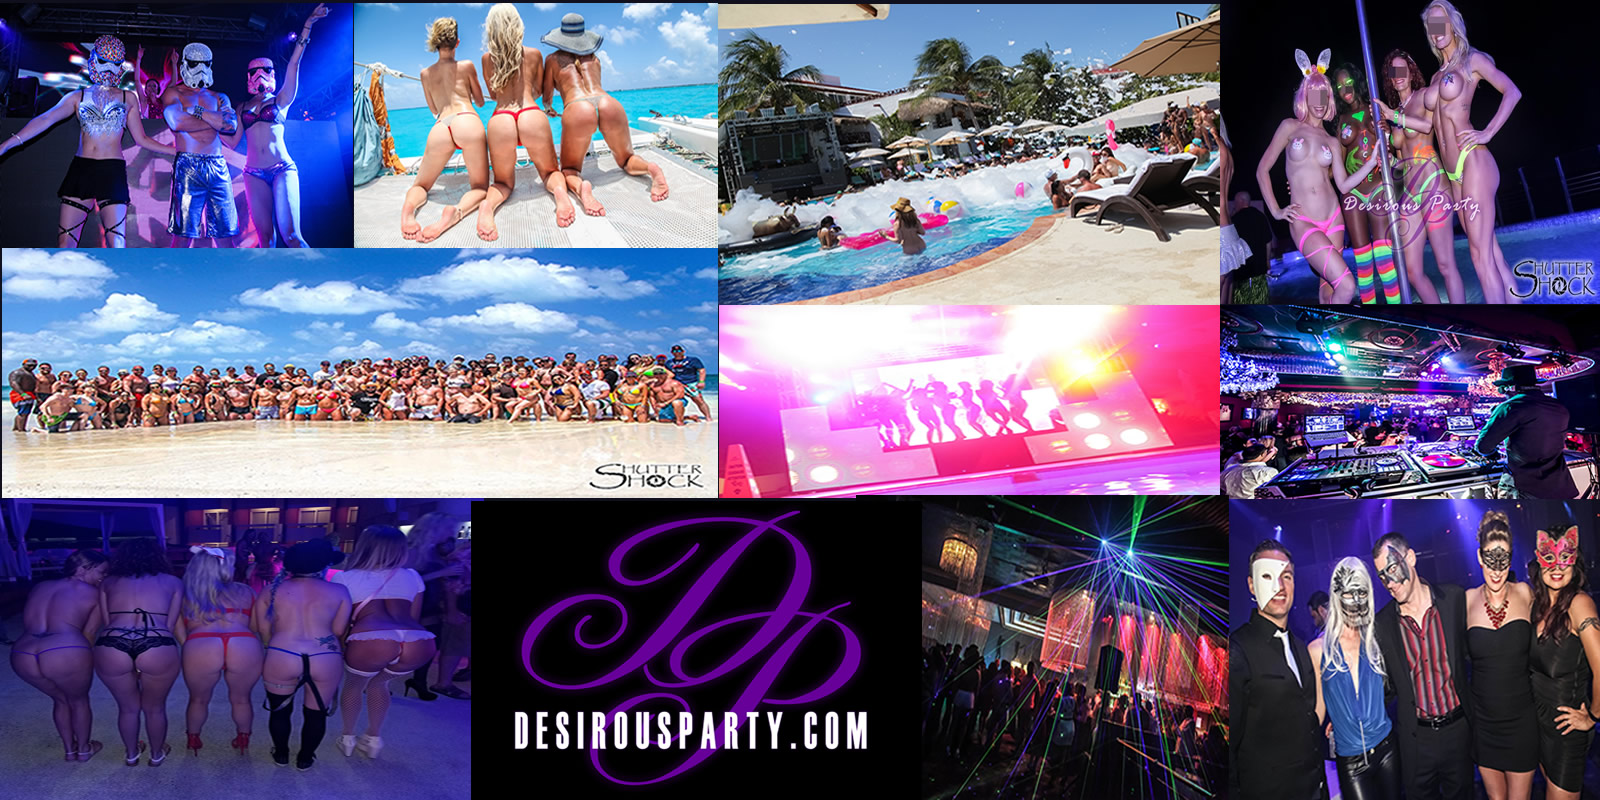 Join DesirousParty for Parties, Trips, and Profiles